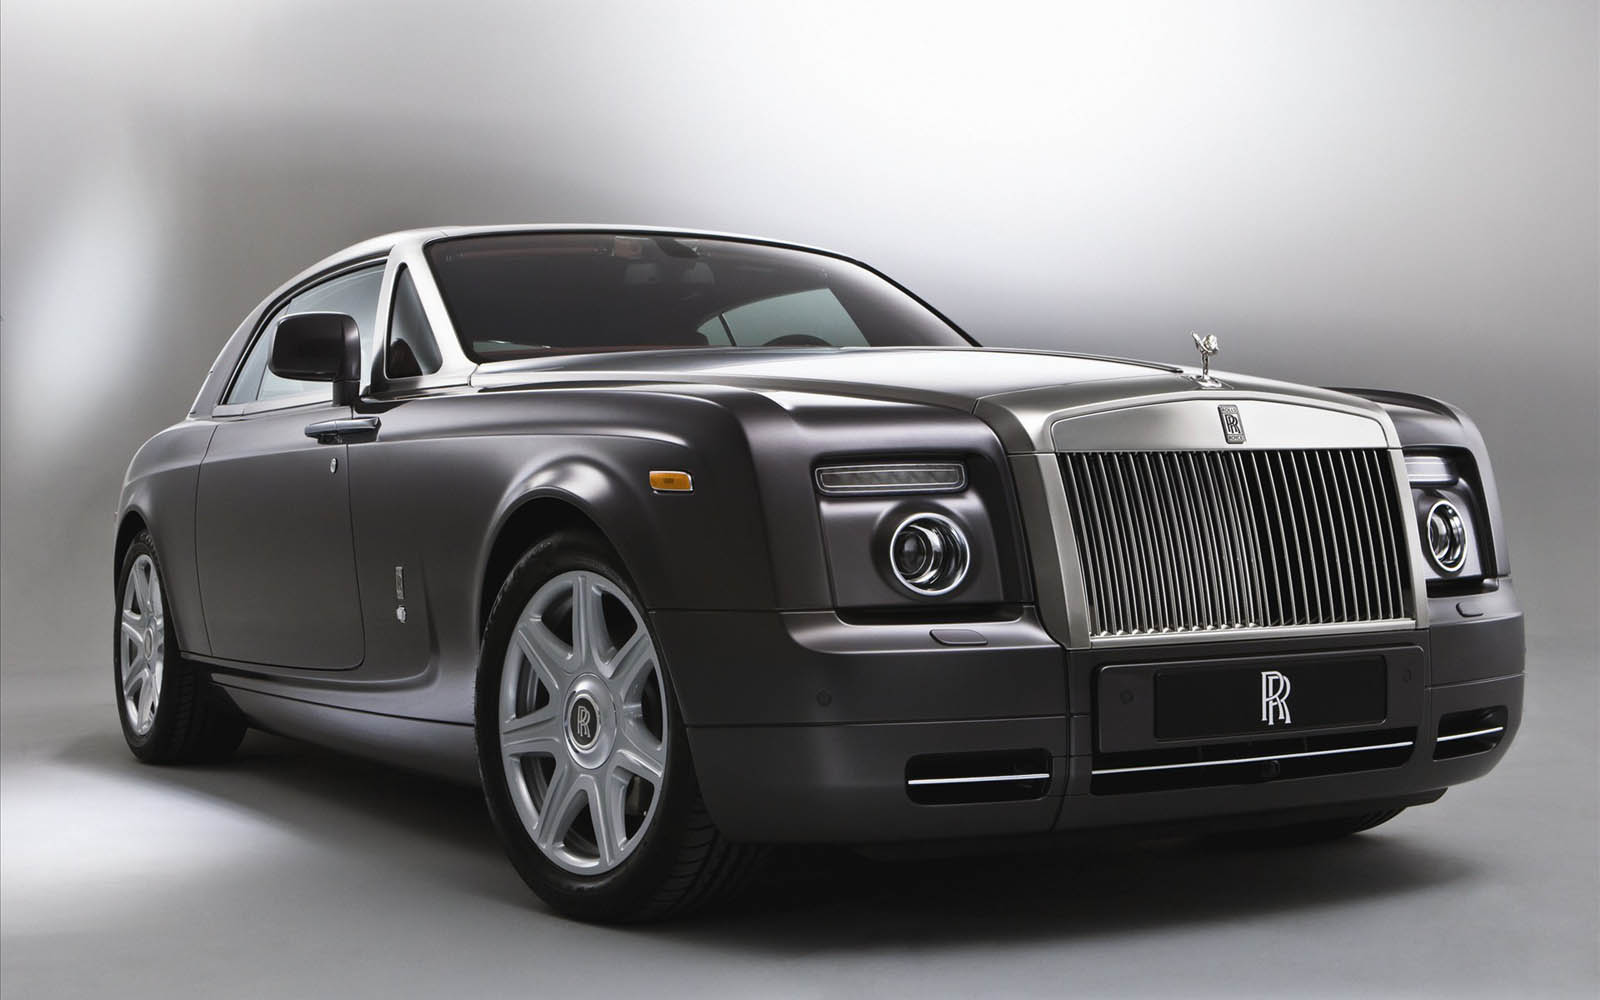 Tag Rolls Royce Phantom Coupe Car Wallpaper Background Paos